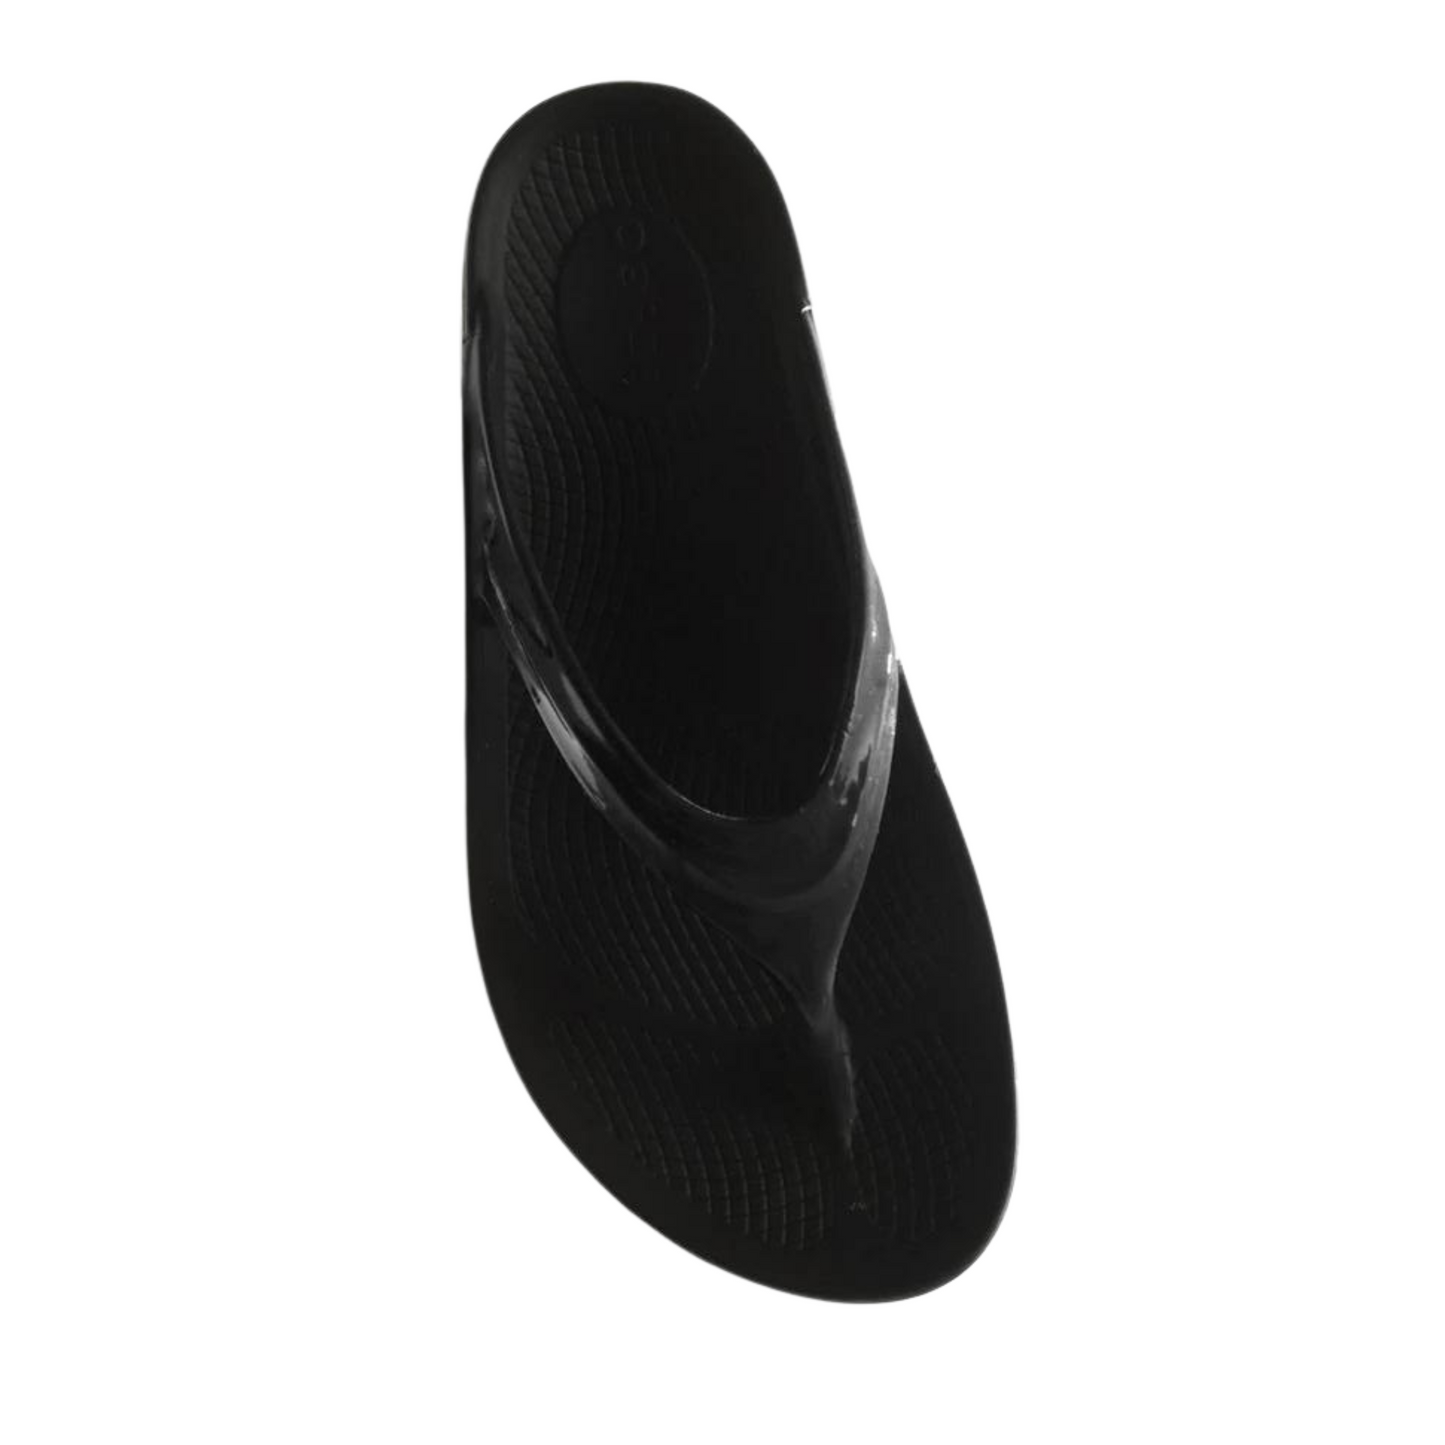 A top view of a black foam sandal with a single between-toe strap and grippy sole.